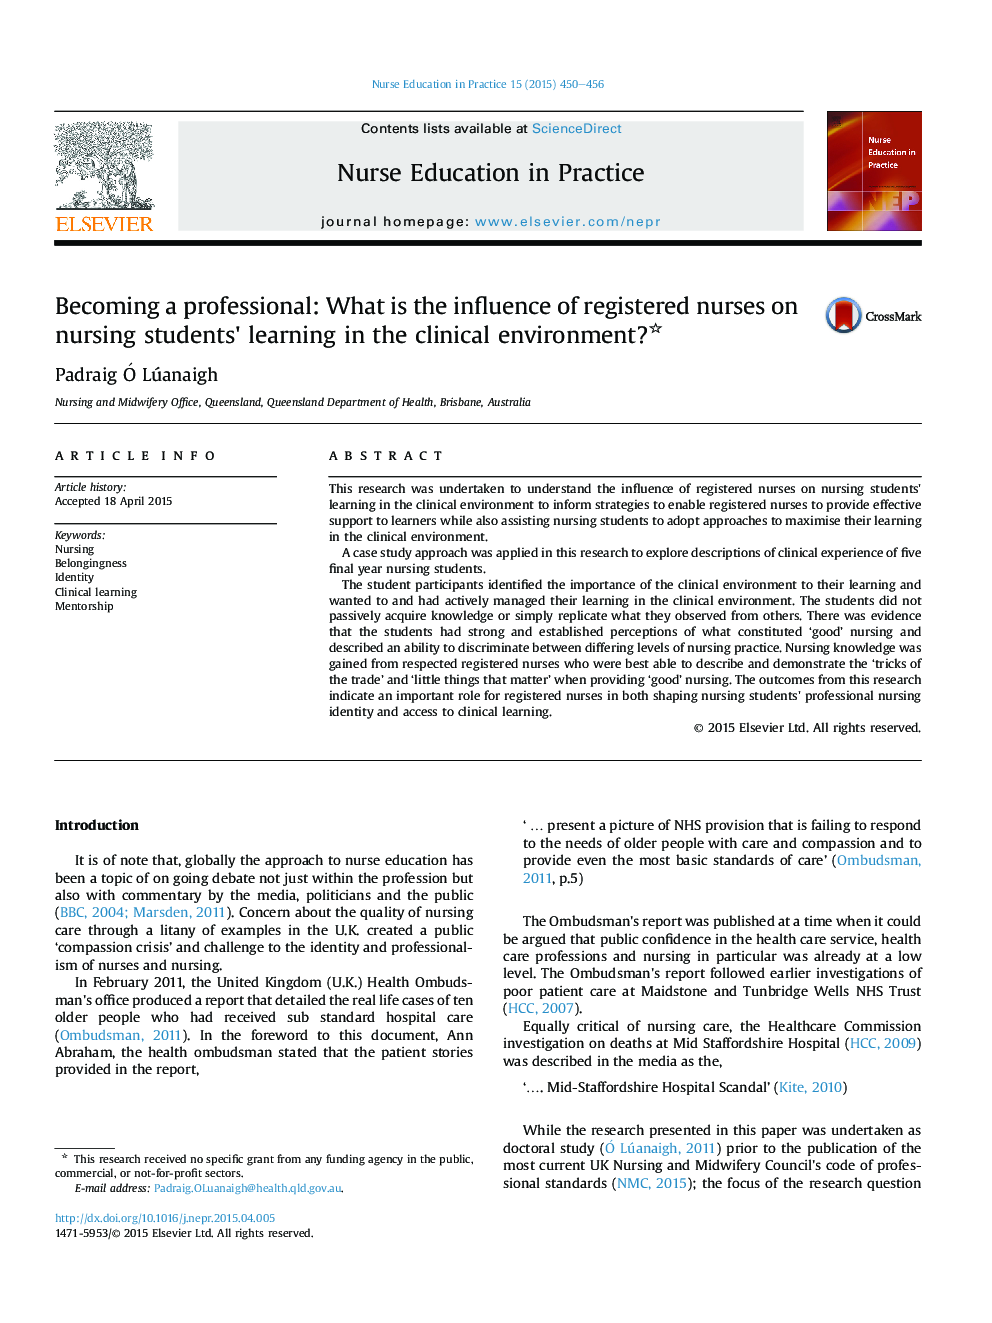 Becoming a professional: What is the influence of registered nurses on nursing students' learning in the clinical environment? 